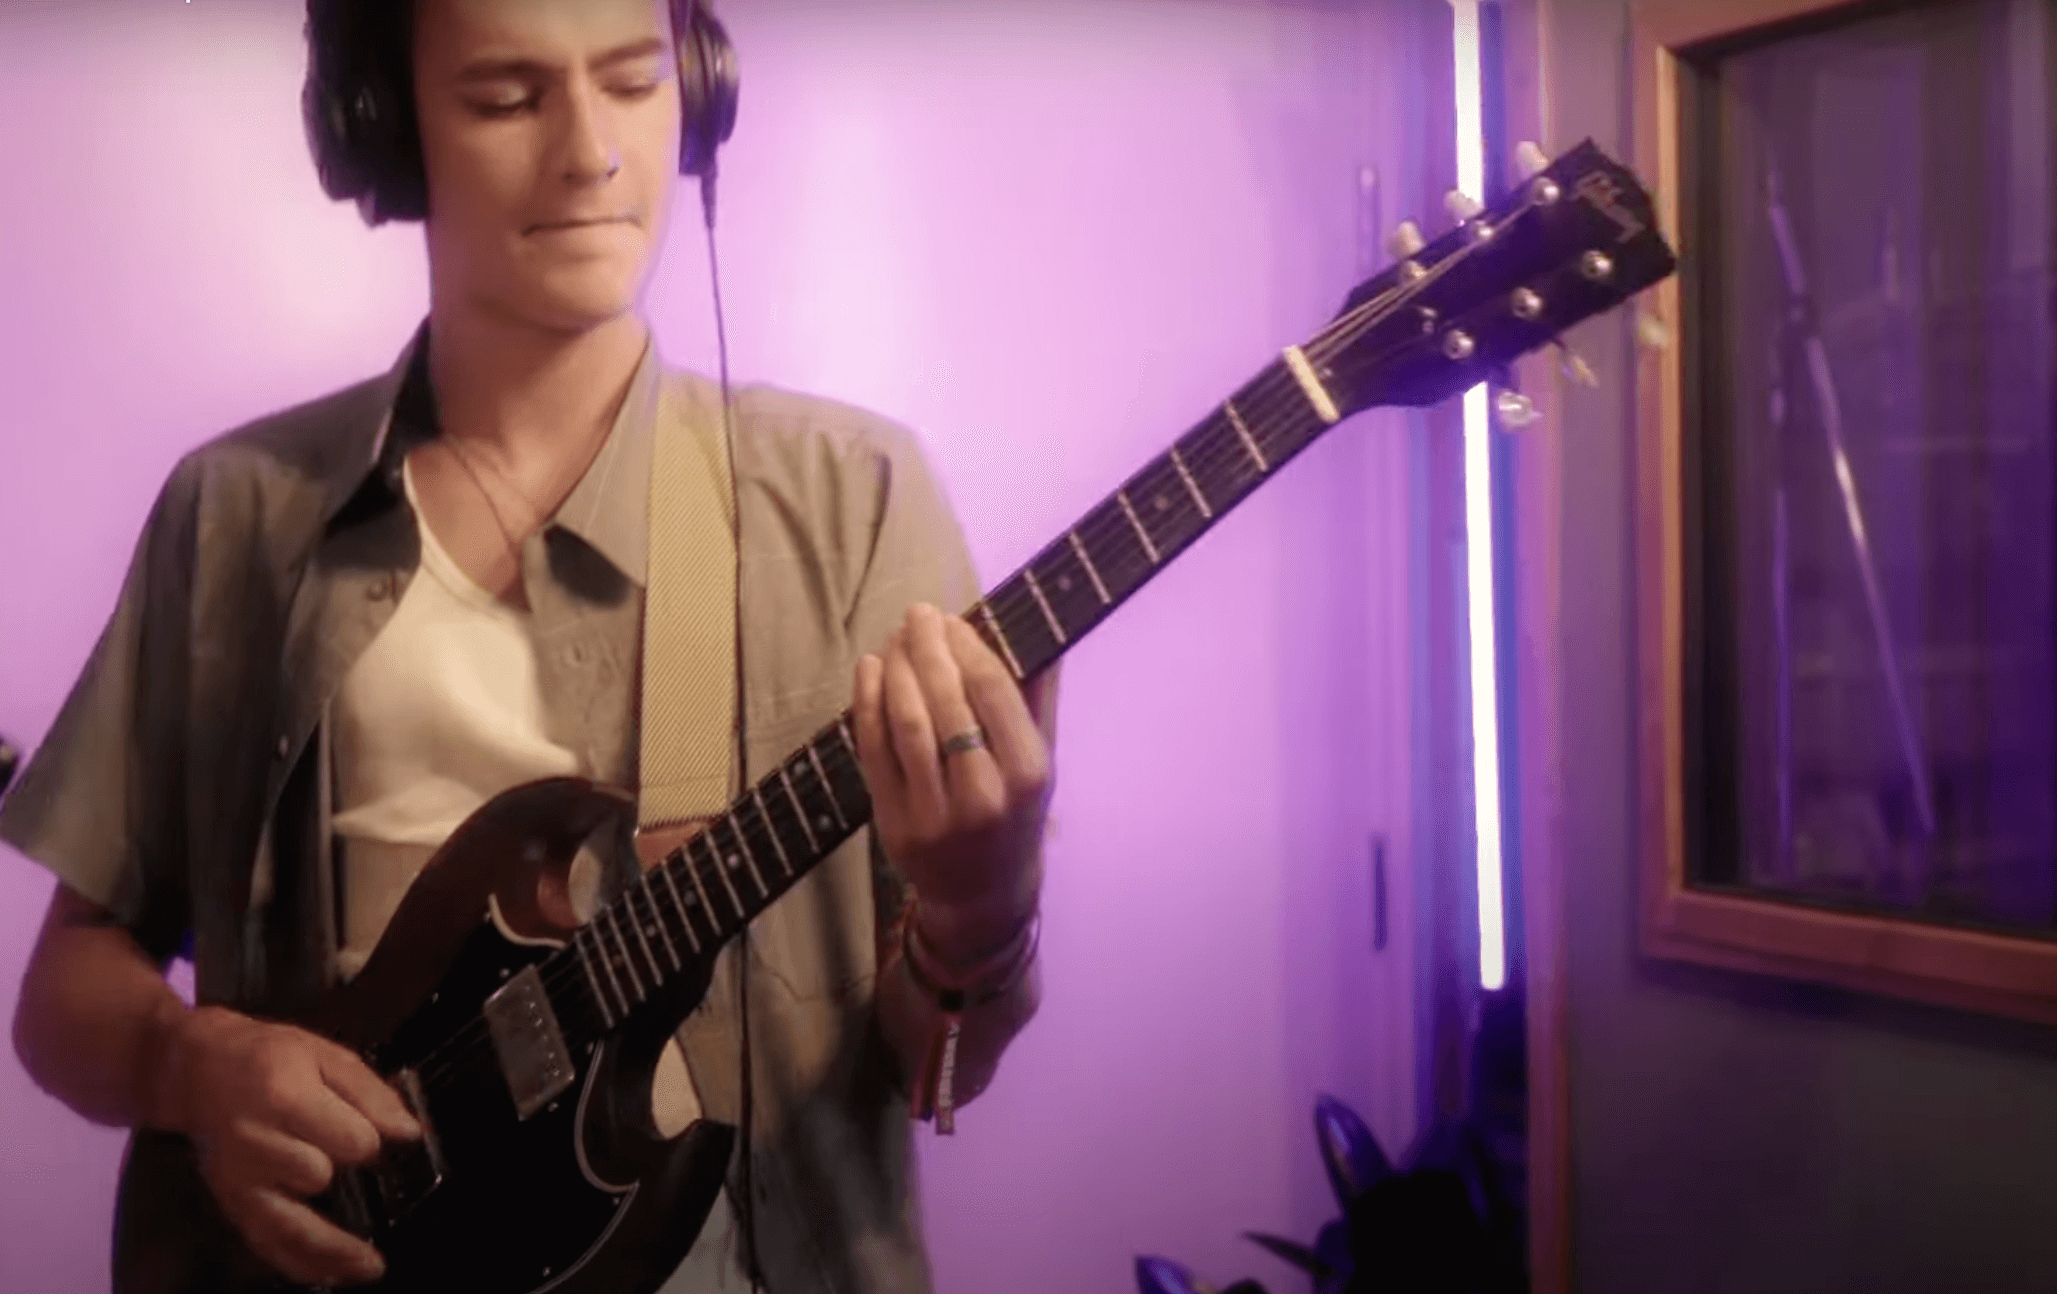 School of Rock student uses music as a tool for recovery [Video]